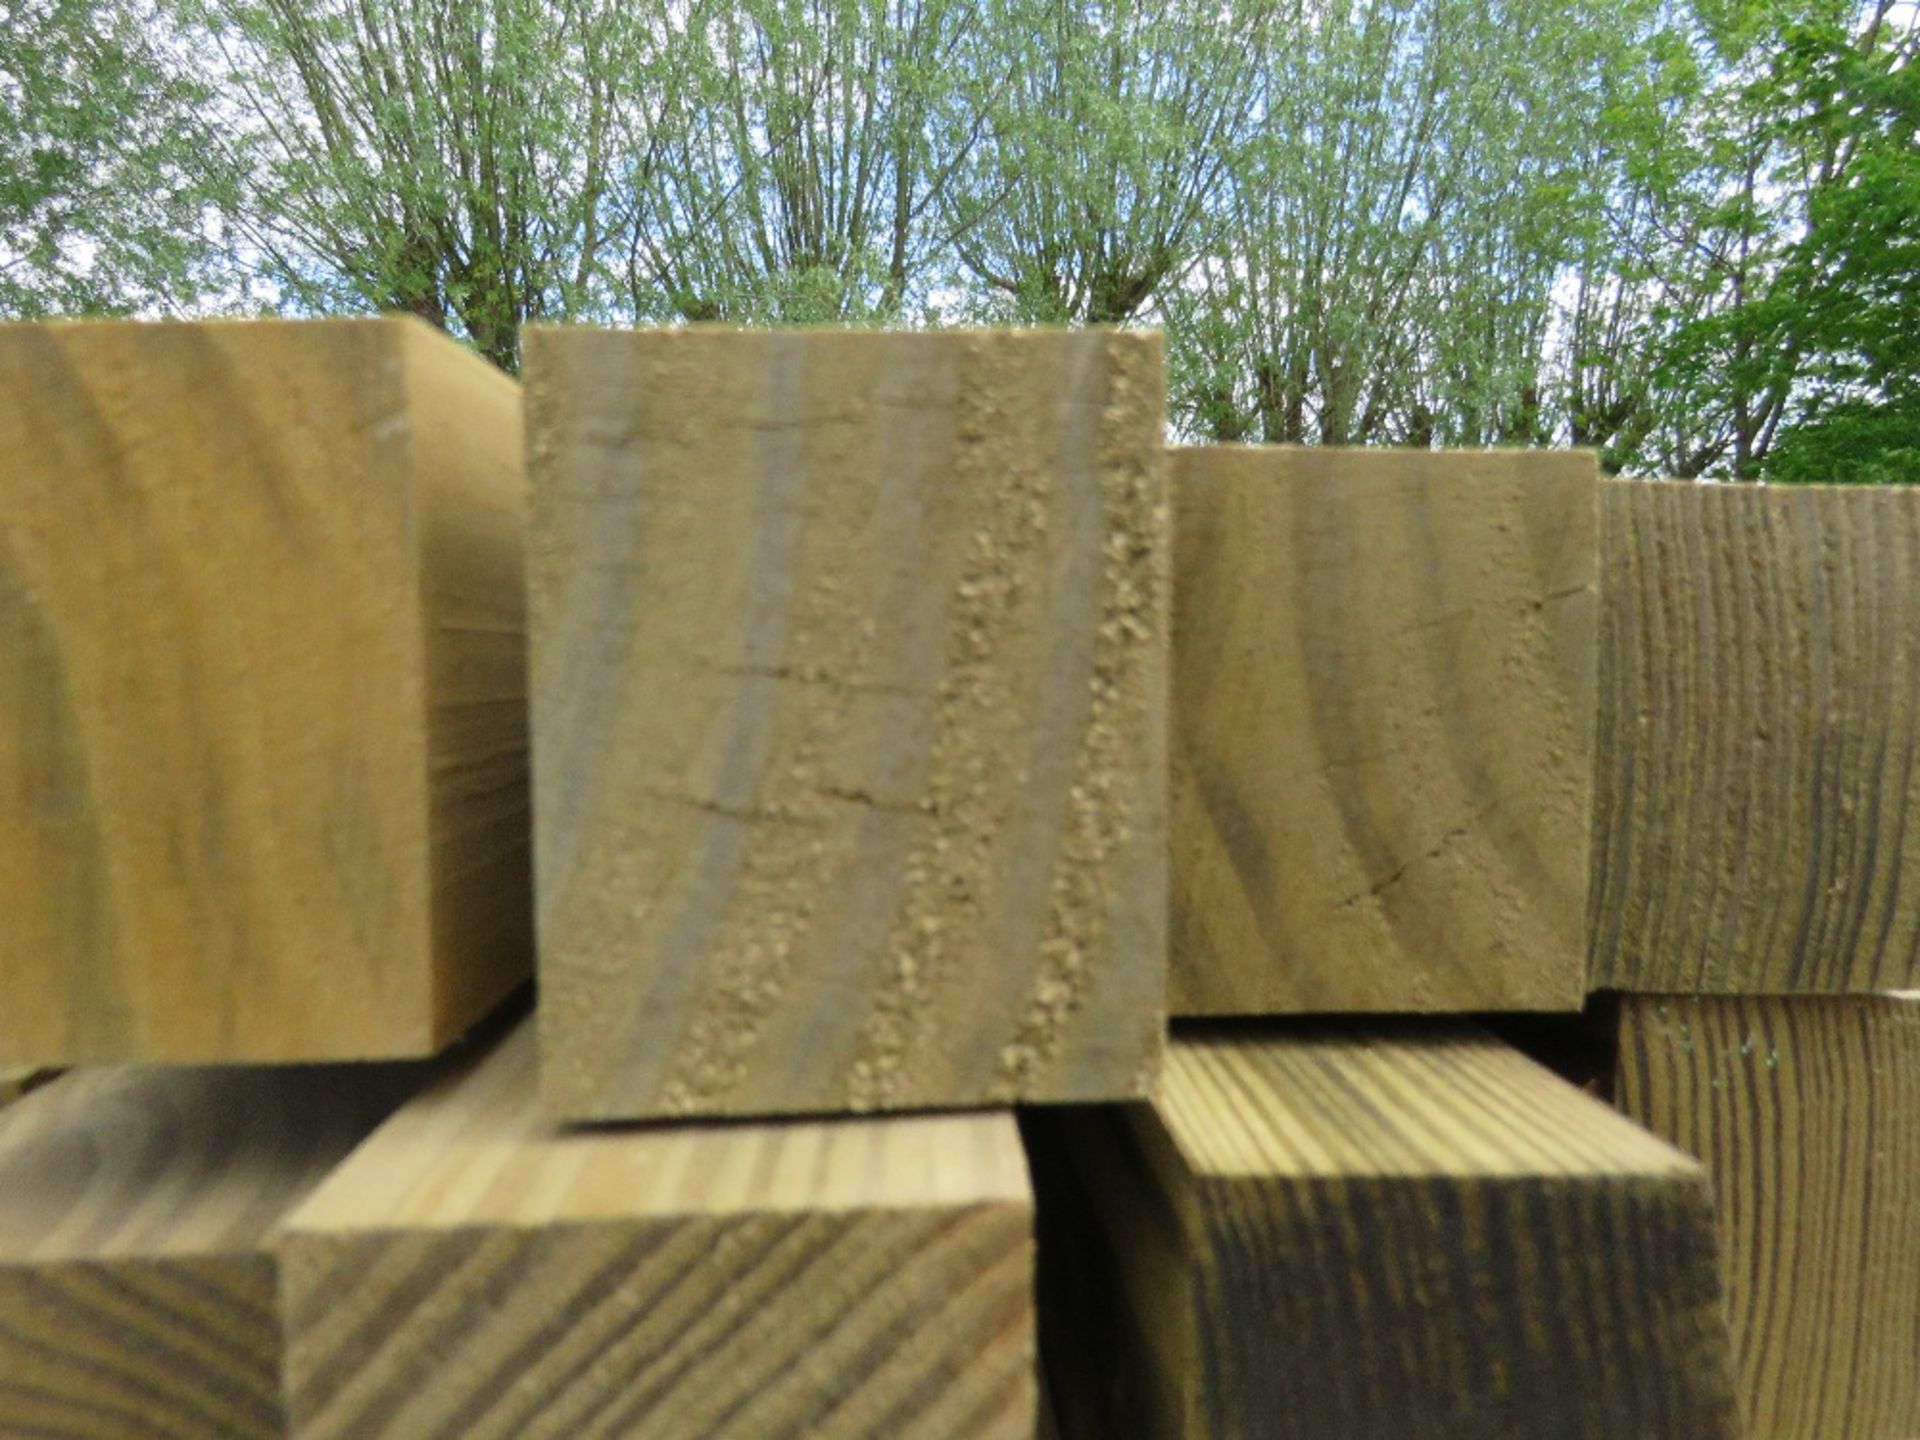 LARGE BUNDLE OF TIMBER BATTENS 2.4-2.7M LENGTH APPROX. - Image 3 of 4